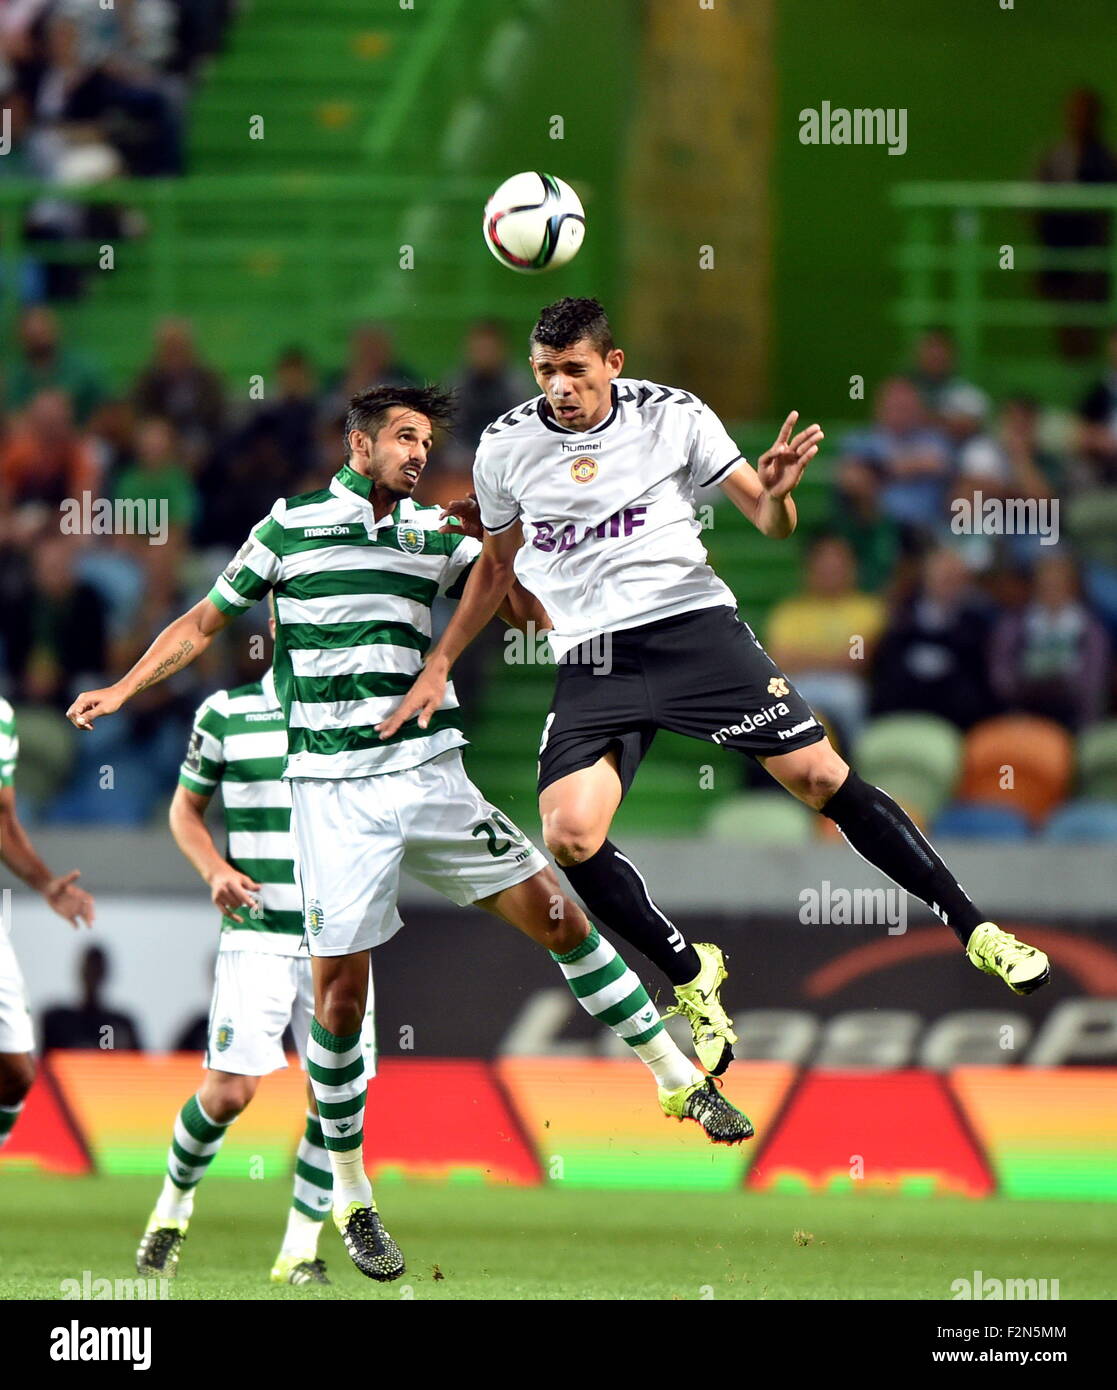 Lisbon, Portugal. 21st Sep, 2015. Sporting's Bryan Ruiz(L) vies with Nacional's player during their 5th round of Portuguese league soccer match at the Alvalade stadium in Lisbon, Portugal, on Sept. 21, 2015. Sporting won 1-0. © Zhang Liyun/Xinhua/Alamy Live News Stock Photo